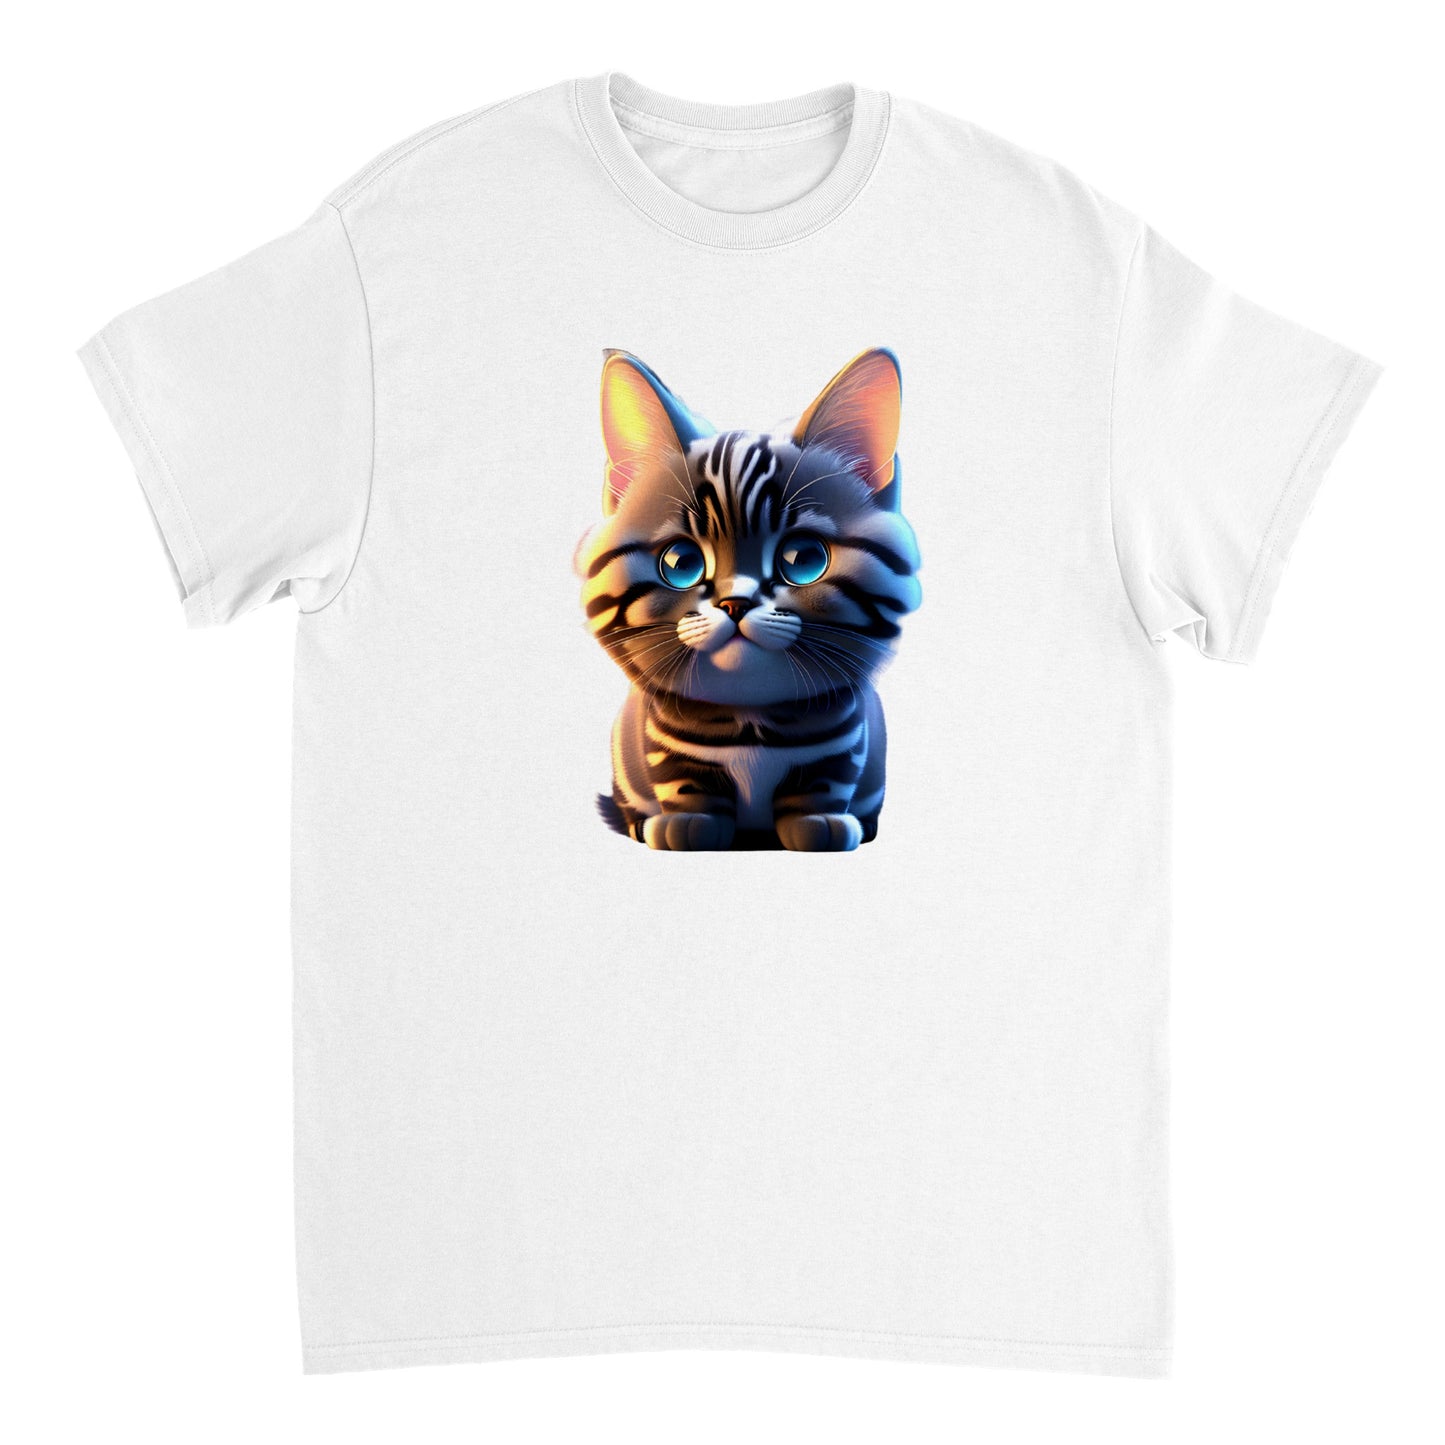 Adorable, Cool, Cute Cats and Kittens Toy - Heavyweight Unisex Crewneck T-shirt 14